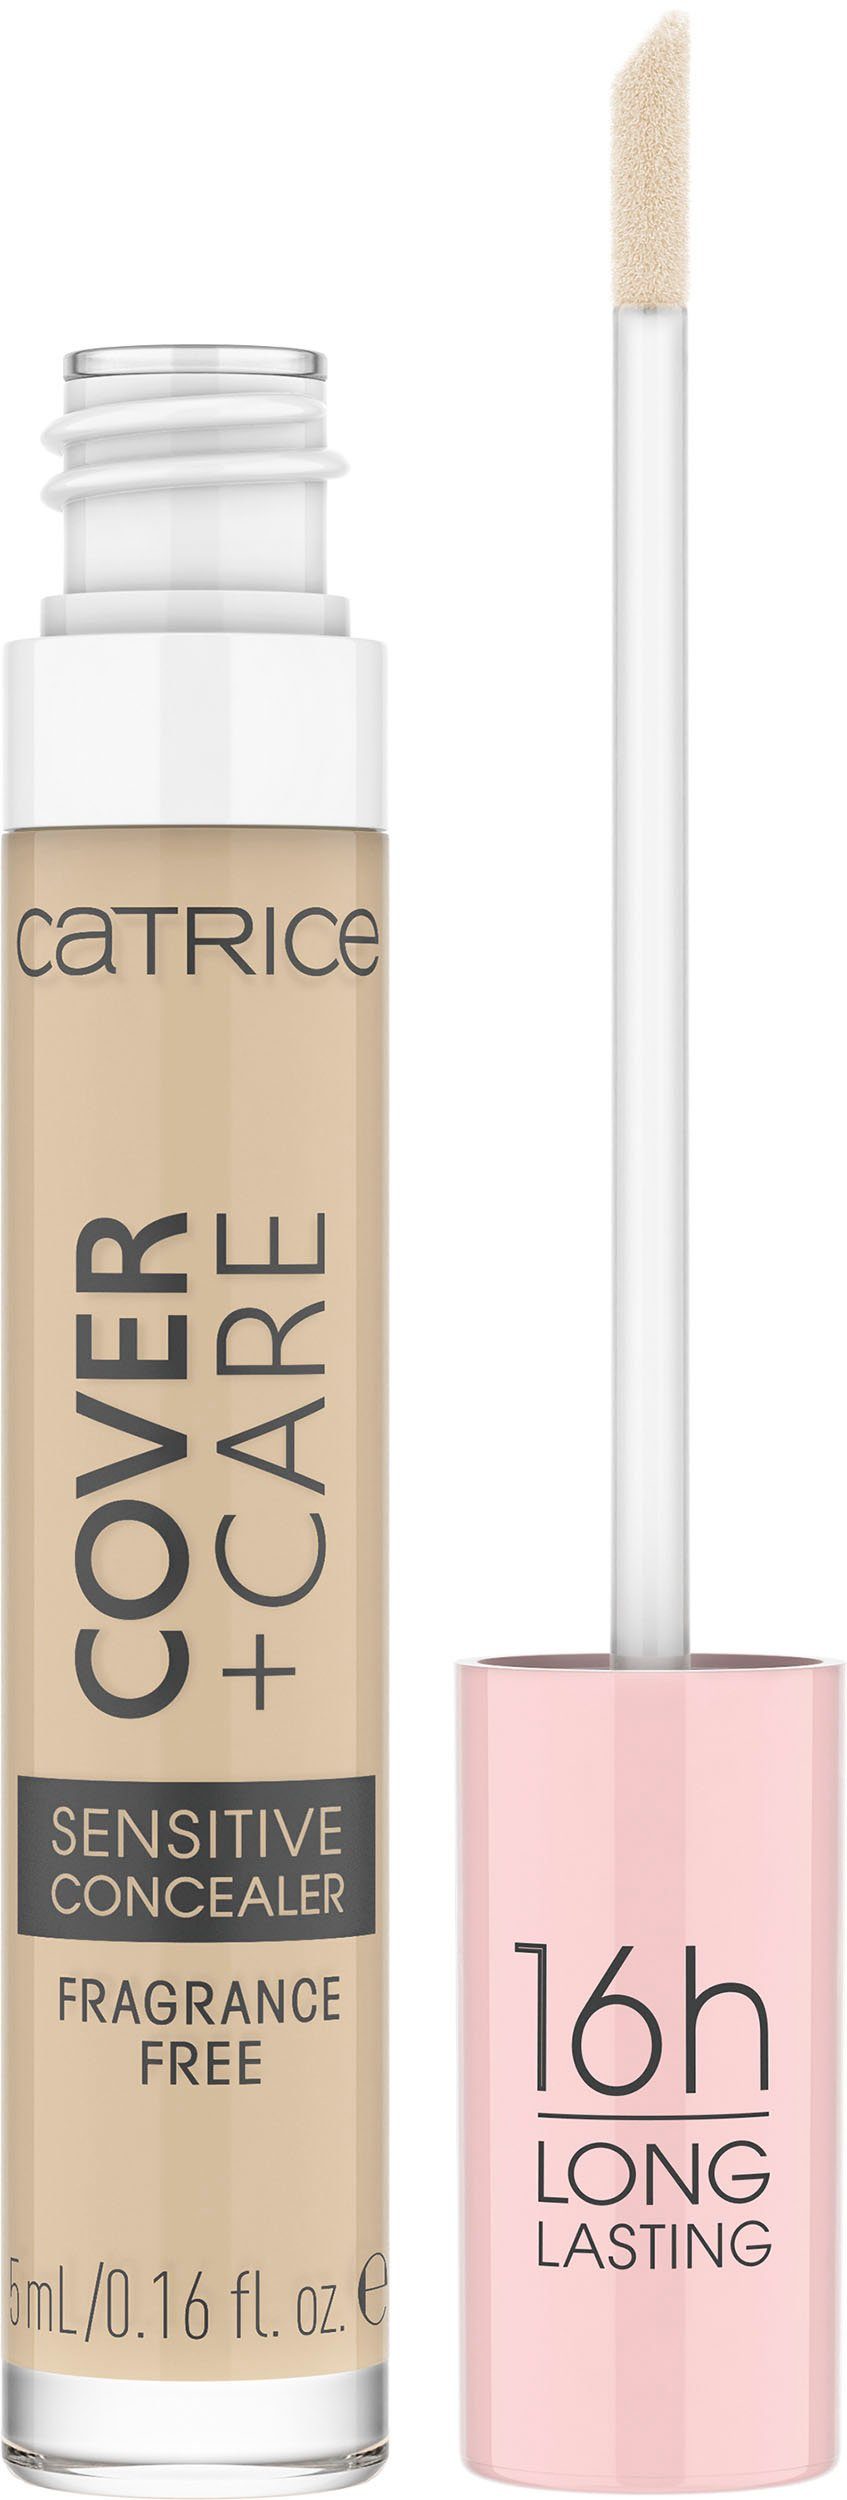 Catrice Concealer Concealer, 3-tlg. Catrice Care + Cover 002N nude Sensitive